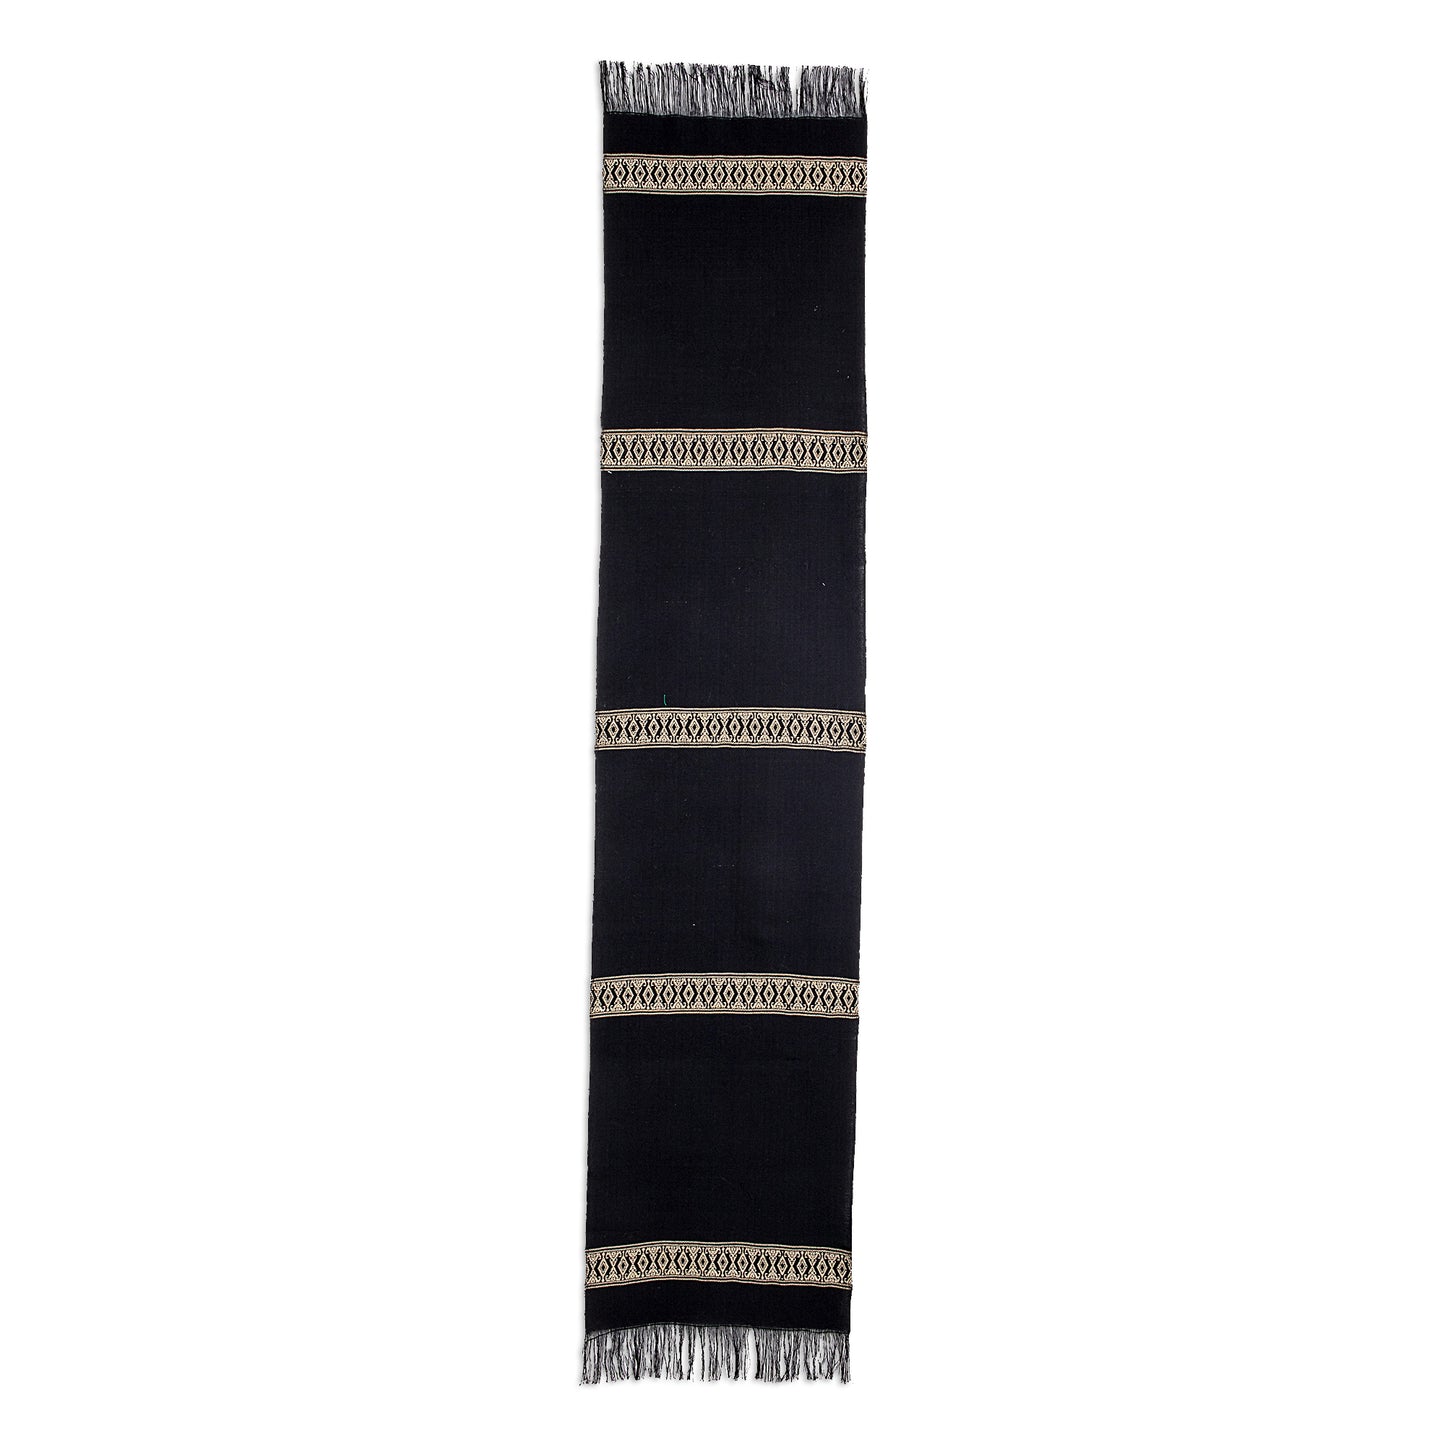 Beige Moon Handwoven Cotton Table Runner in Black from Guatemala